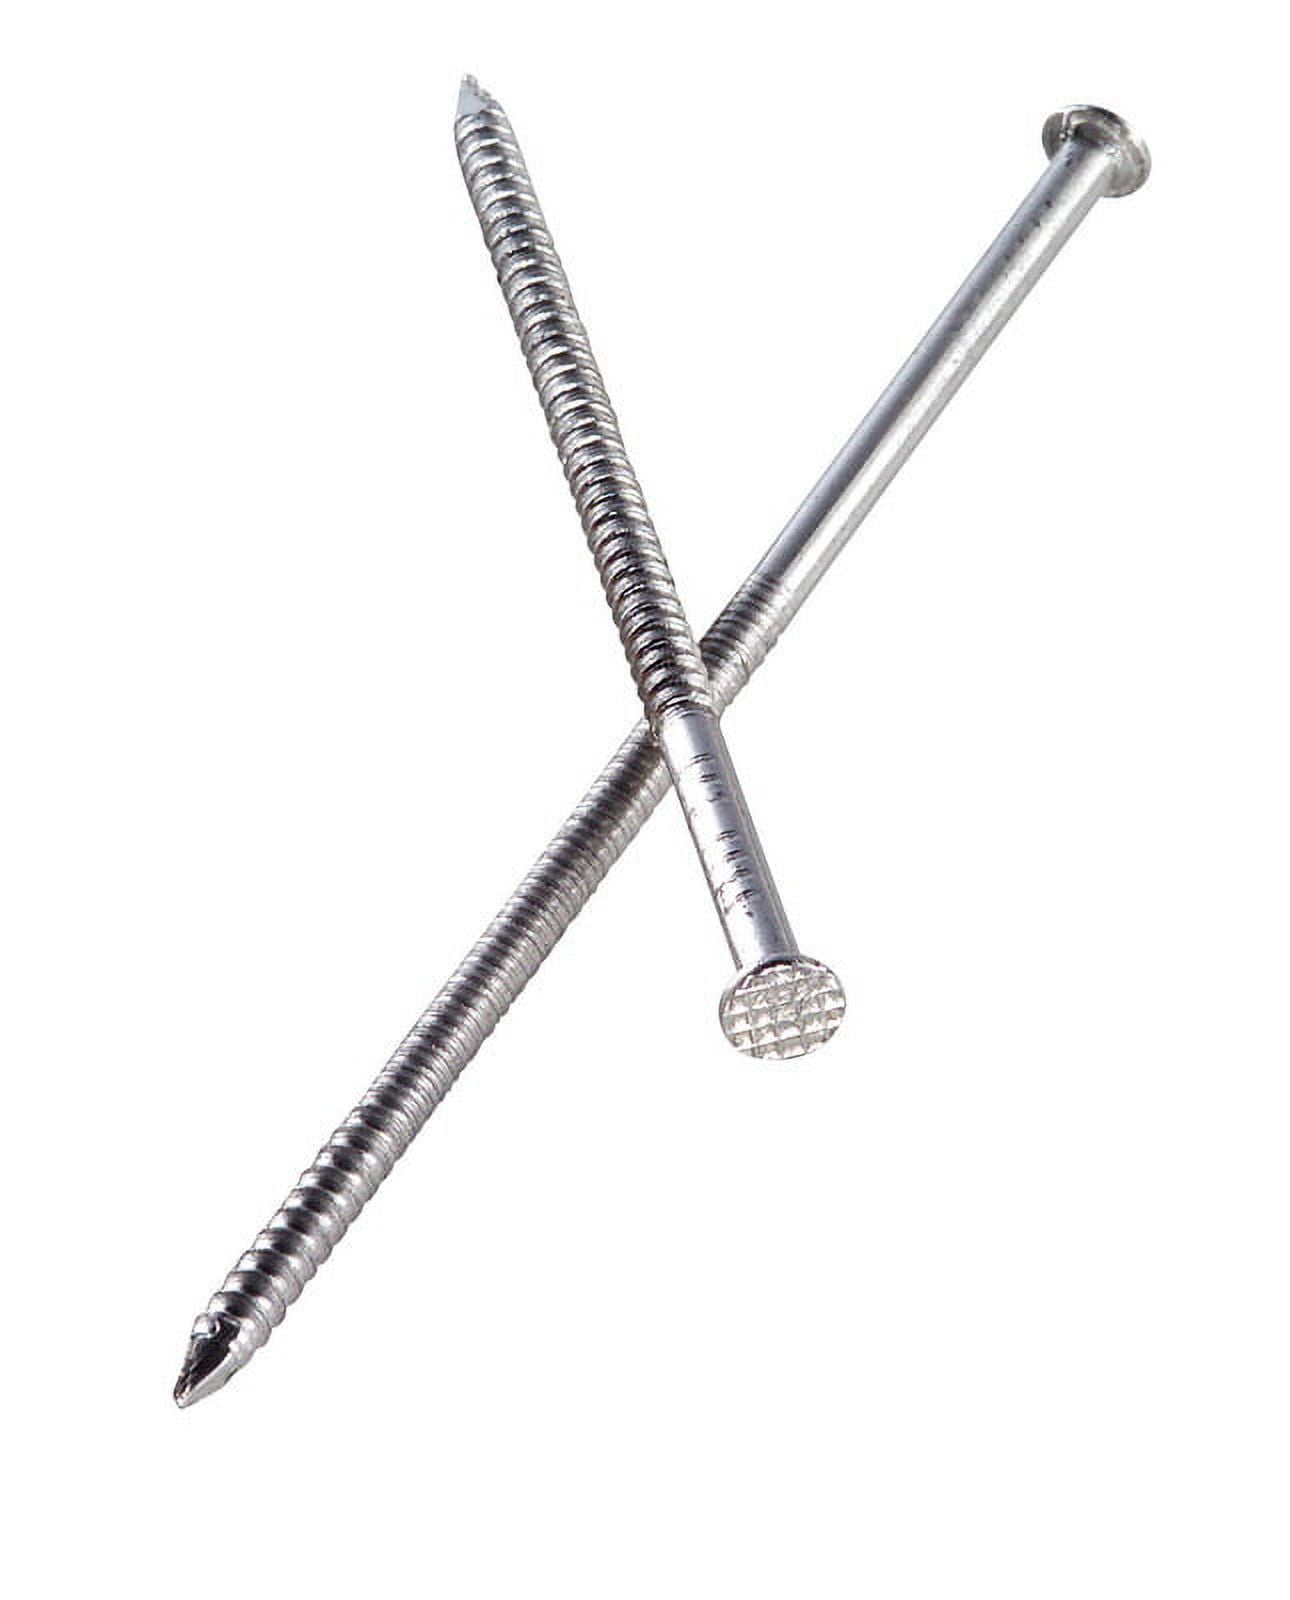 5435169 4d 1.5 In. Siding Stainless Steel Nail With Round Head Annular Ring Shank - Pack Of 398